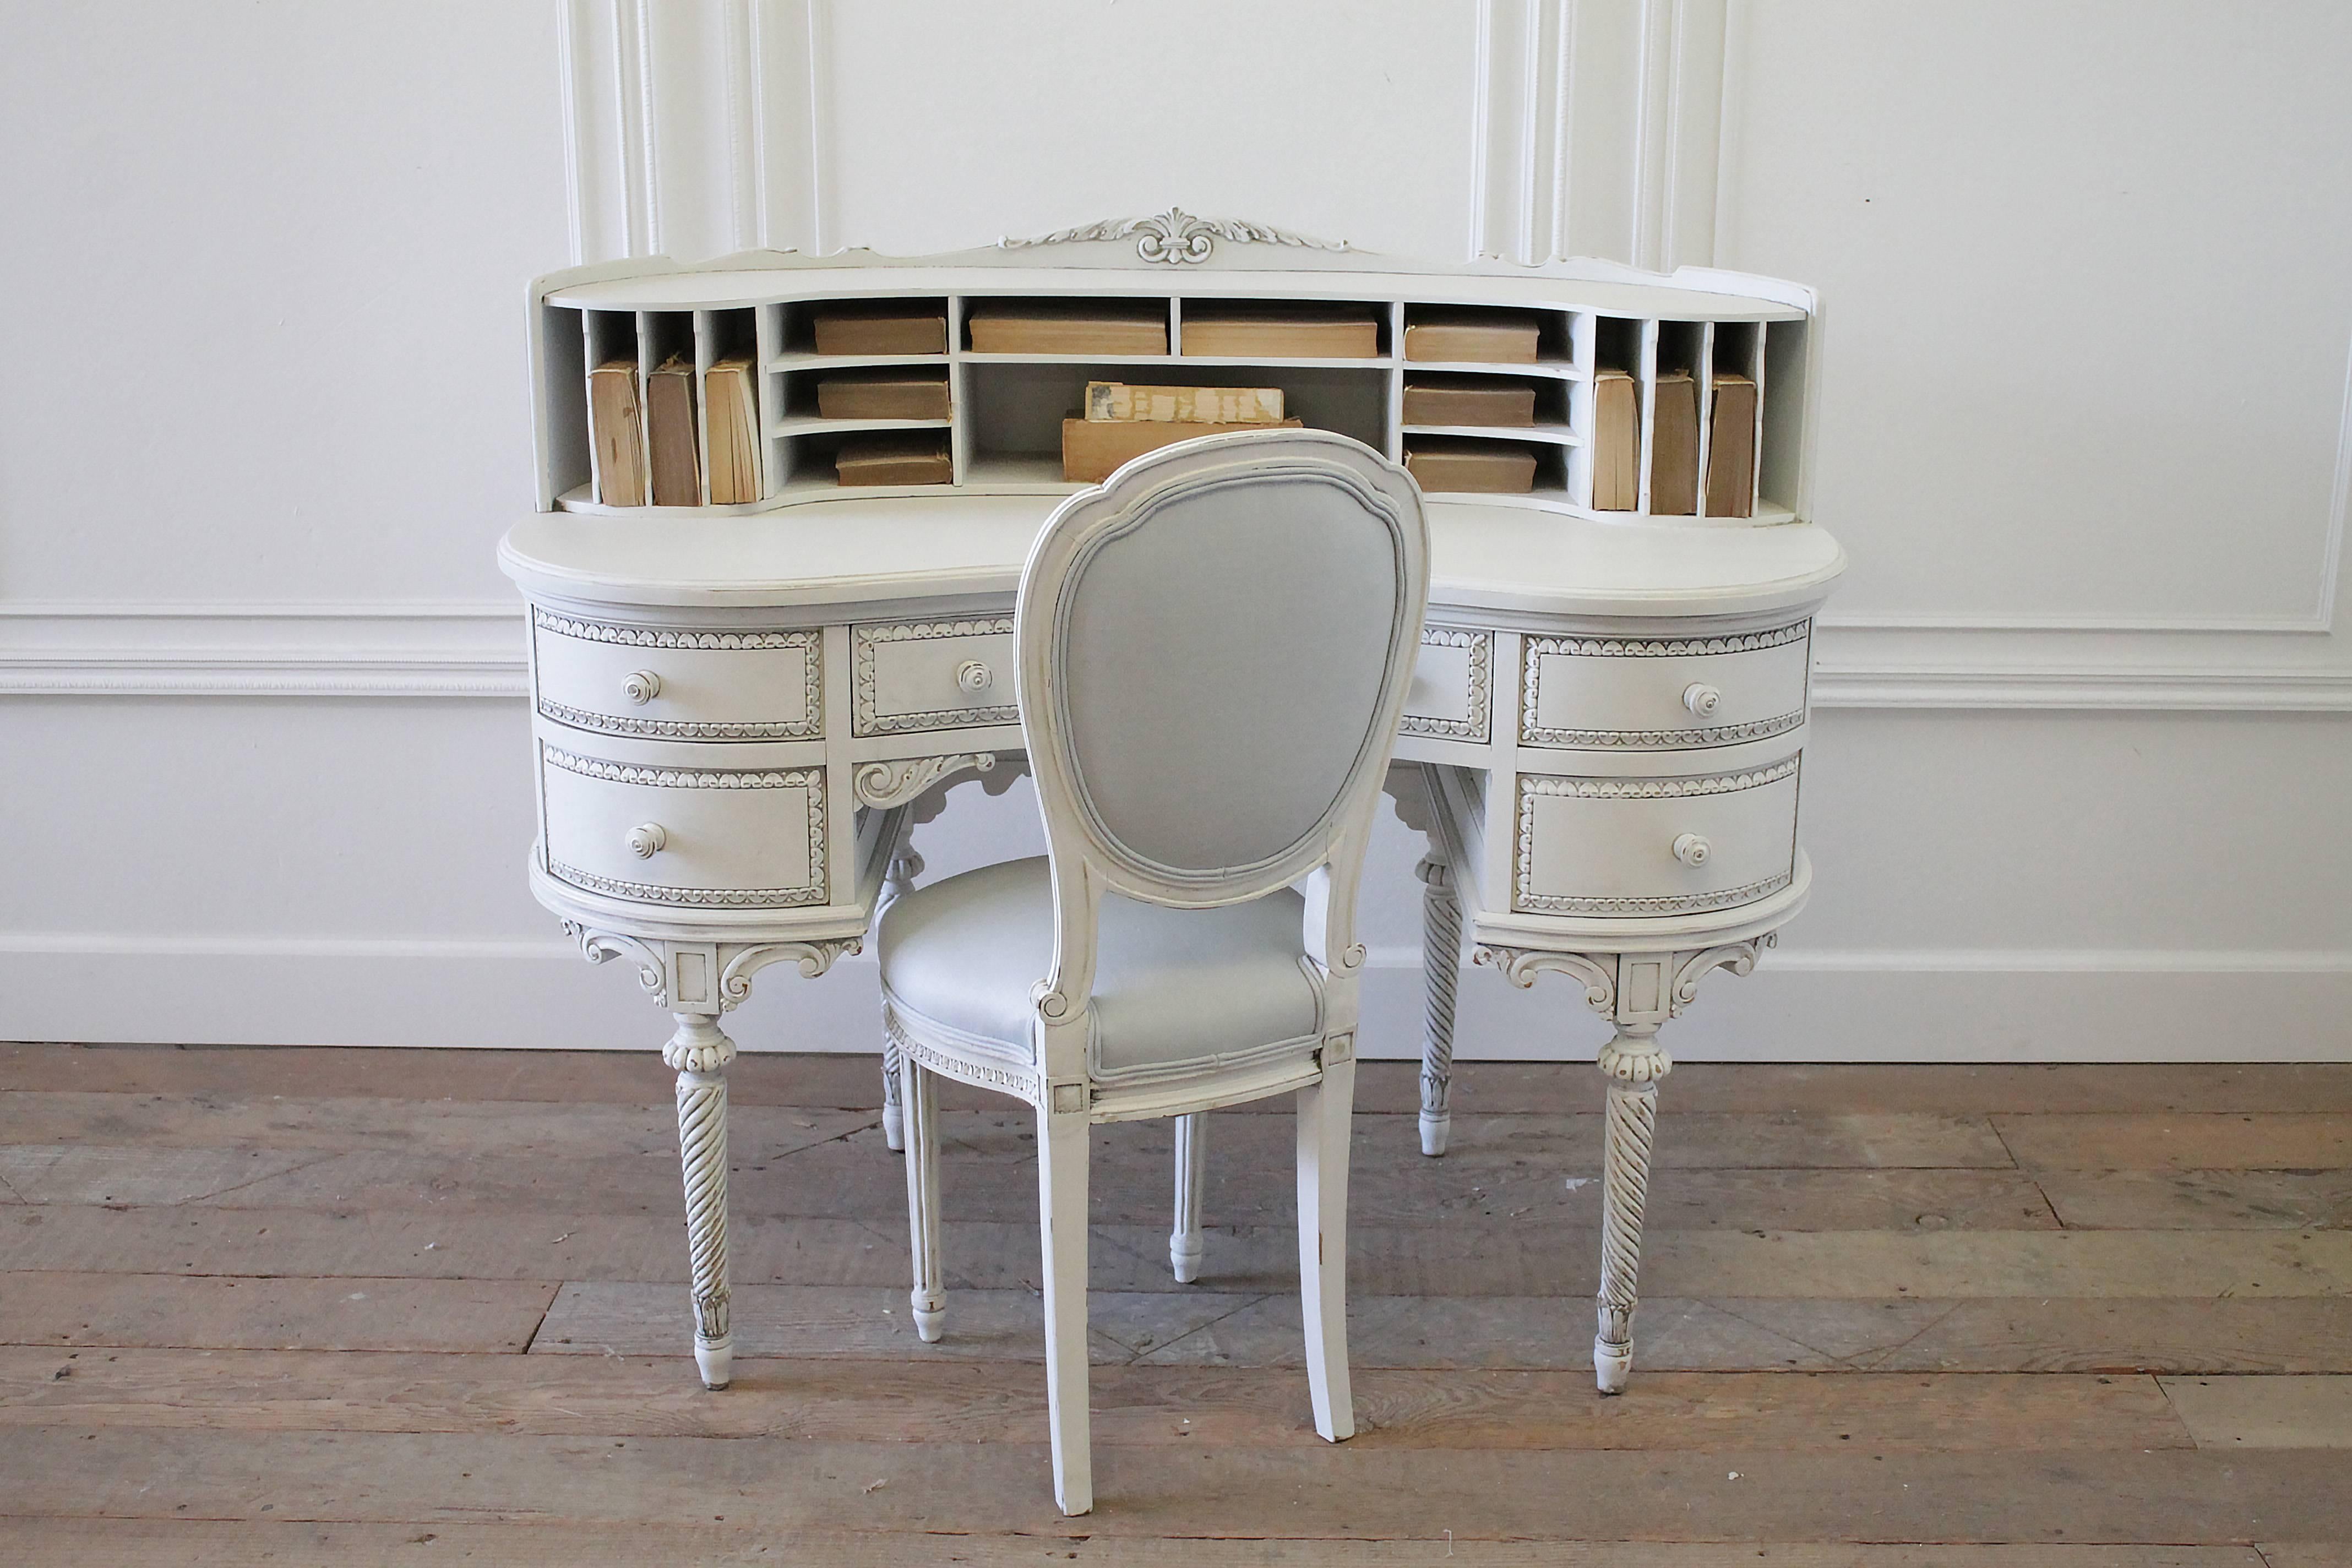 Beautiful kidney bean shaped desk has been painted in our oyster white, with subtle distressing and finished with an antique glaze. The desk has plenty of storage, with five working drawers, 17 open mail slots above. Beautifully carved with twisted